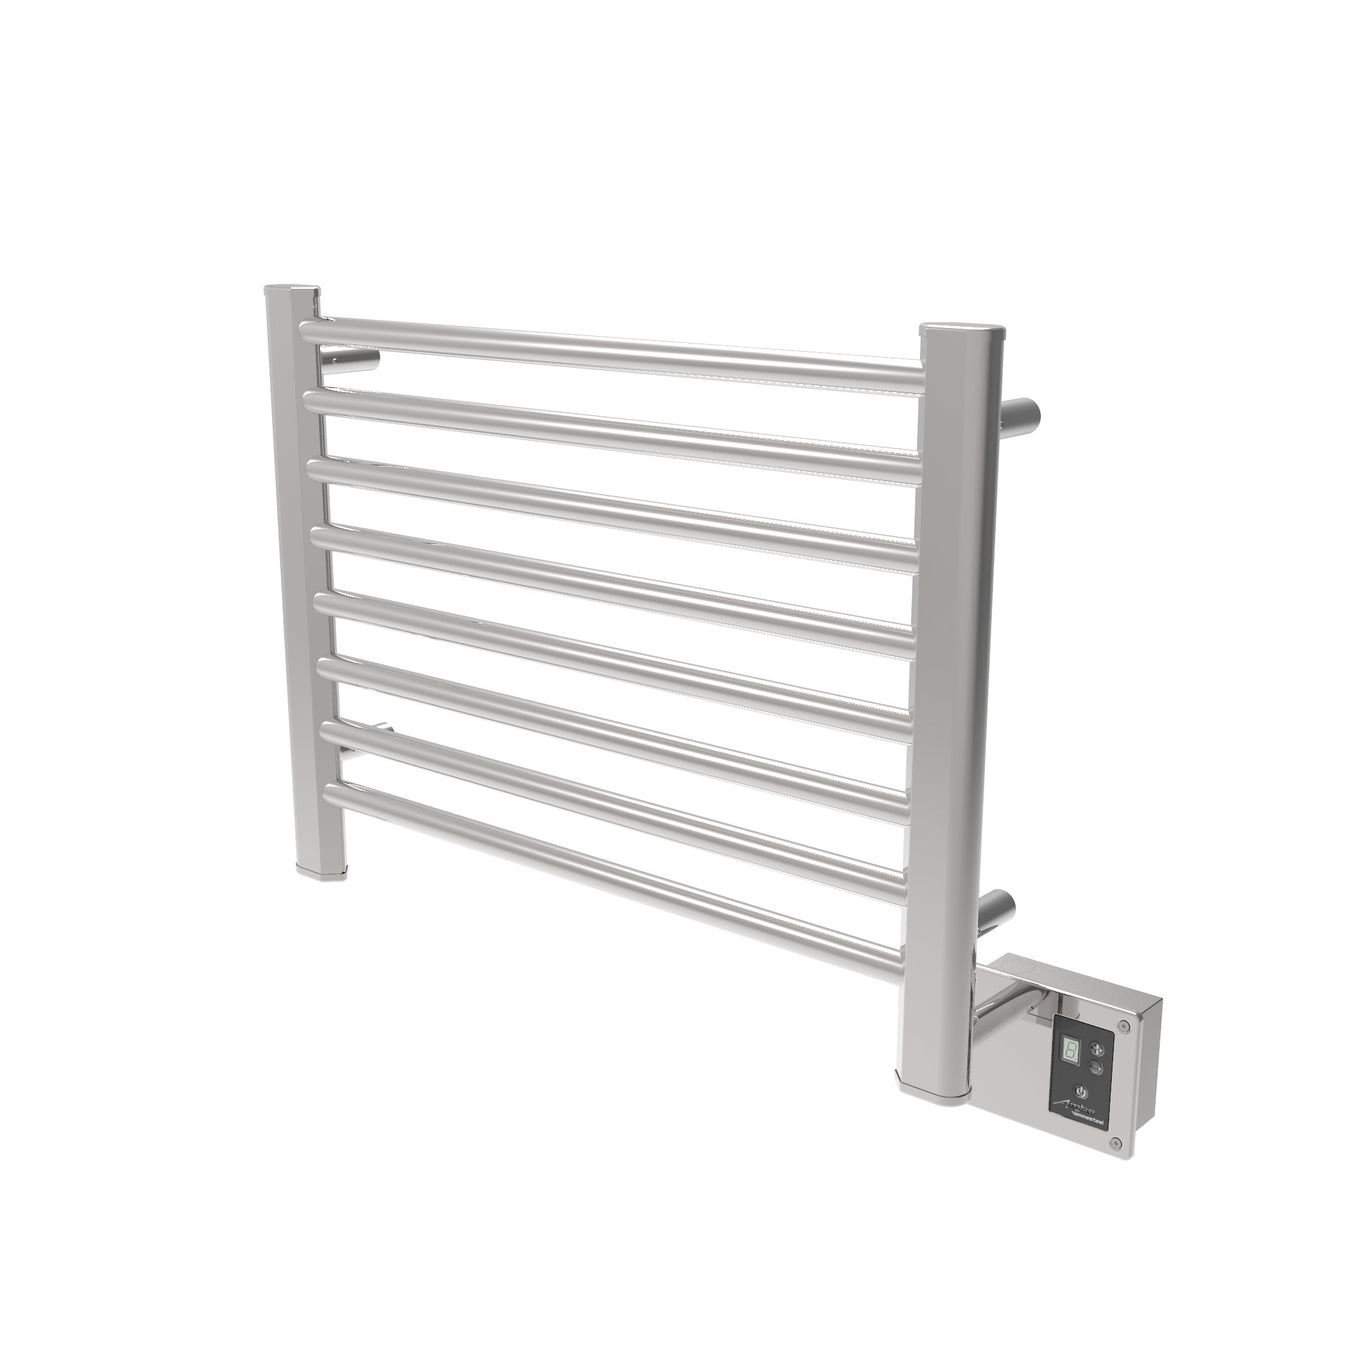 Amba Products Sirio Collection S2921 Towel Warmers